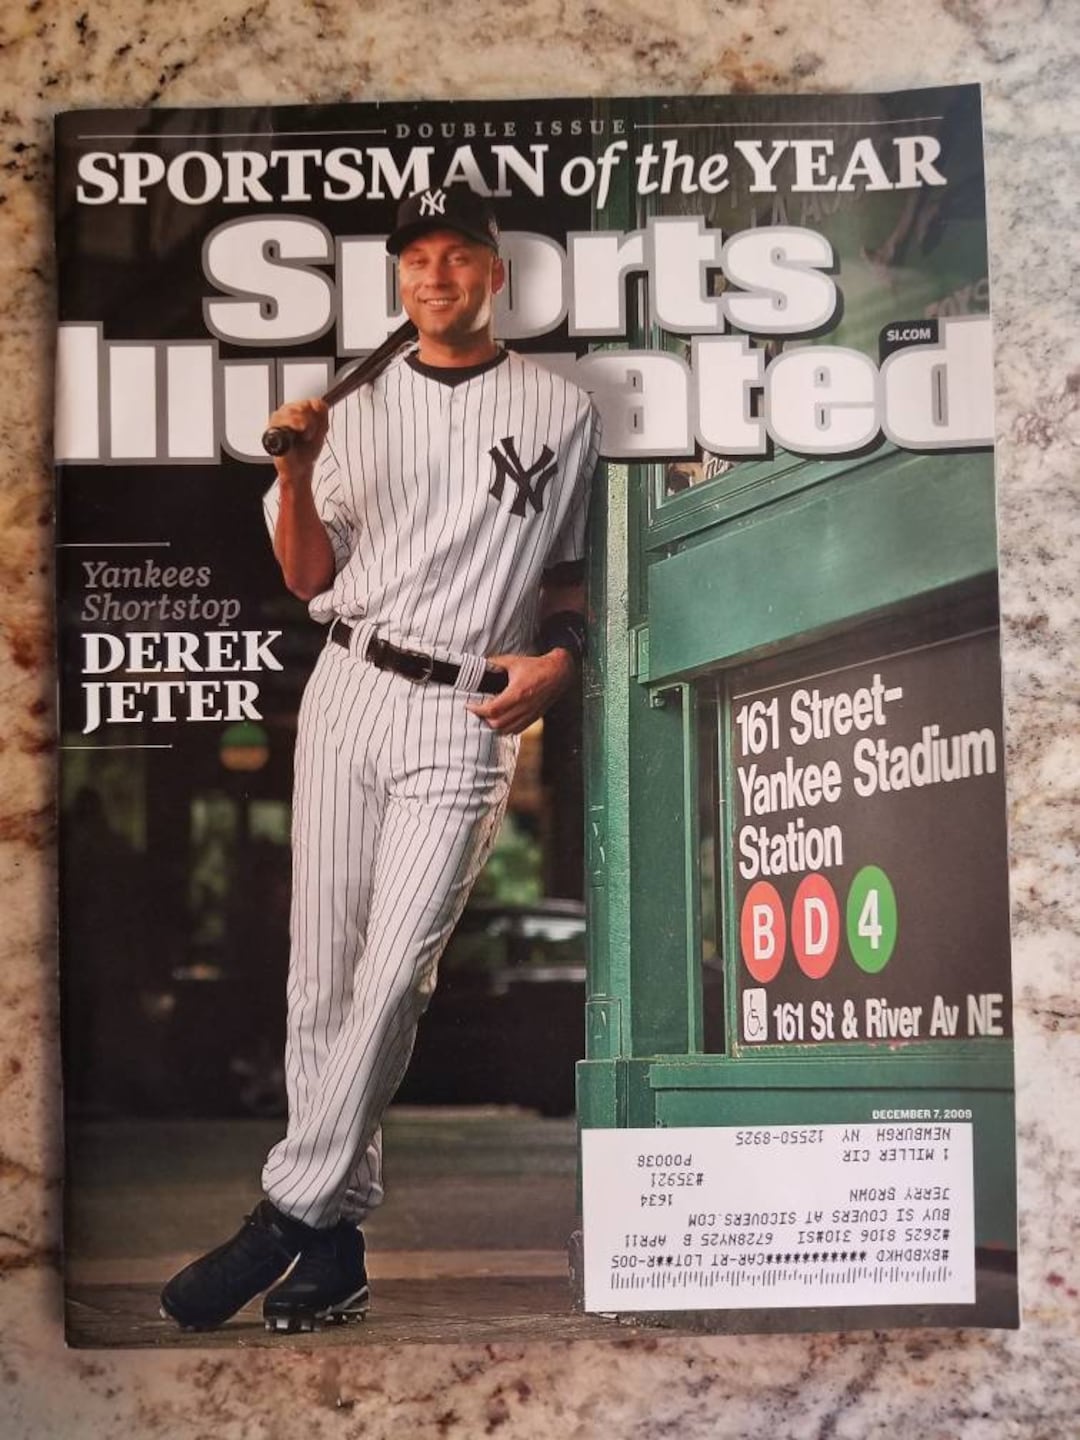 New York Yankees, 2009 World Series Sports Illustrated Cover Poster